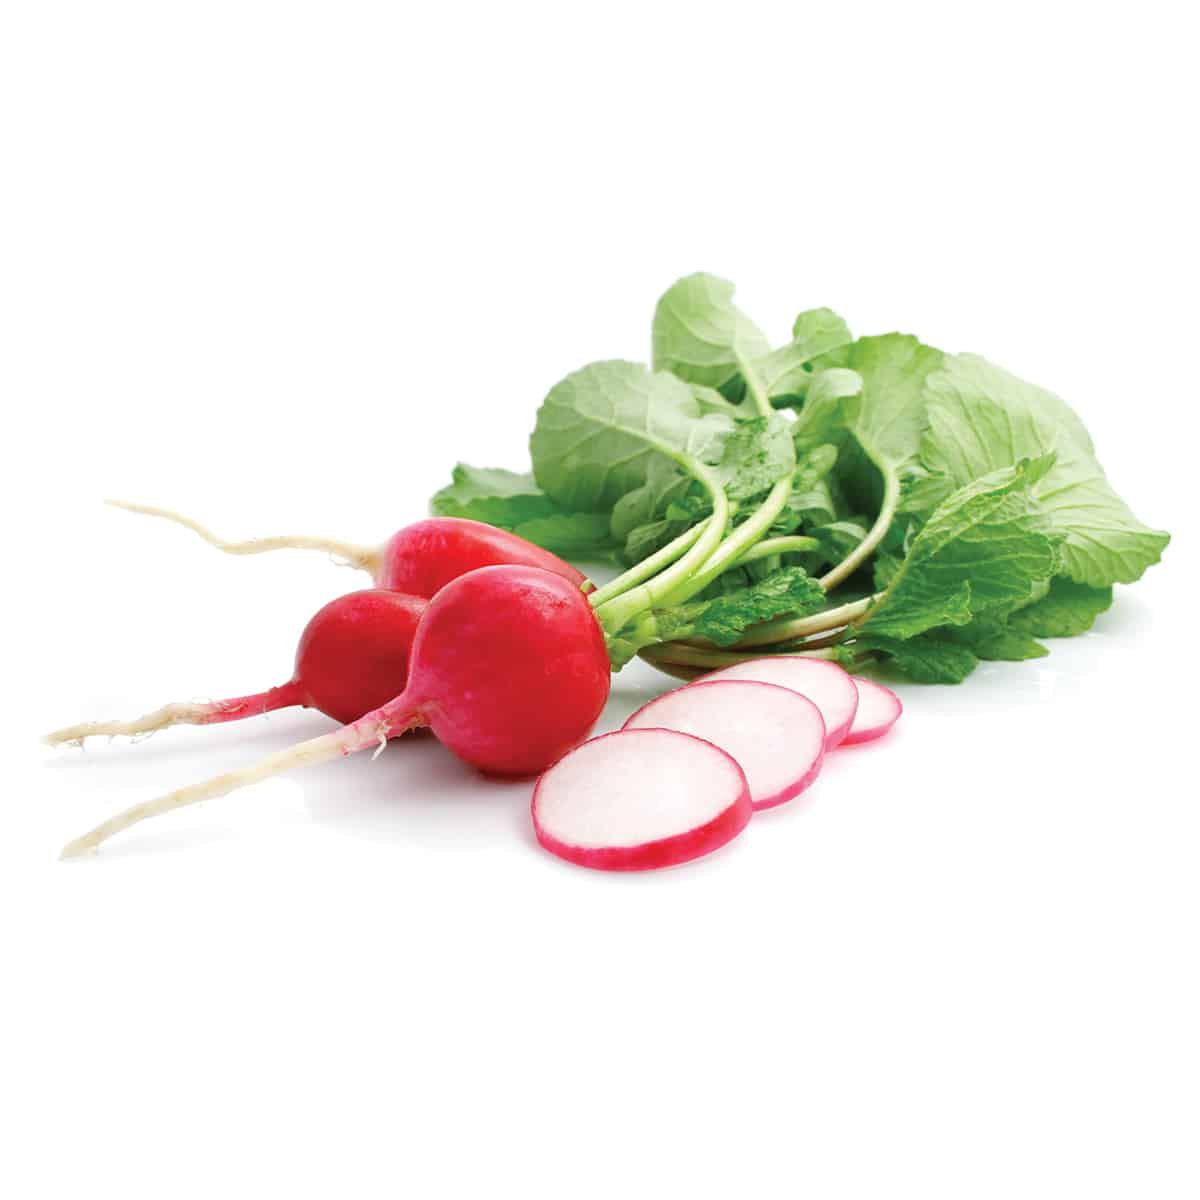 Pan-Seared Radishes with Miso Sauce